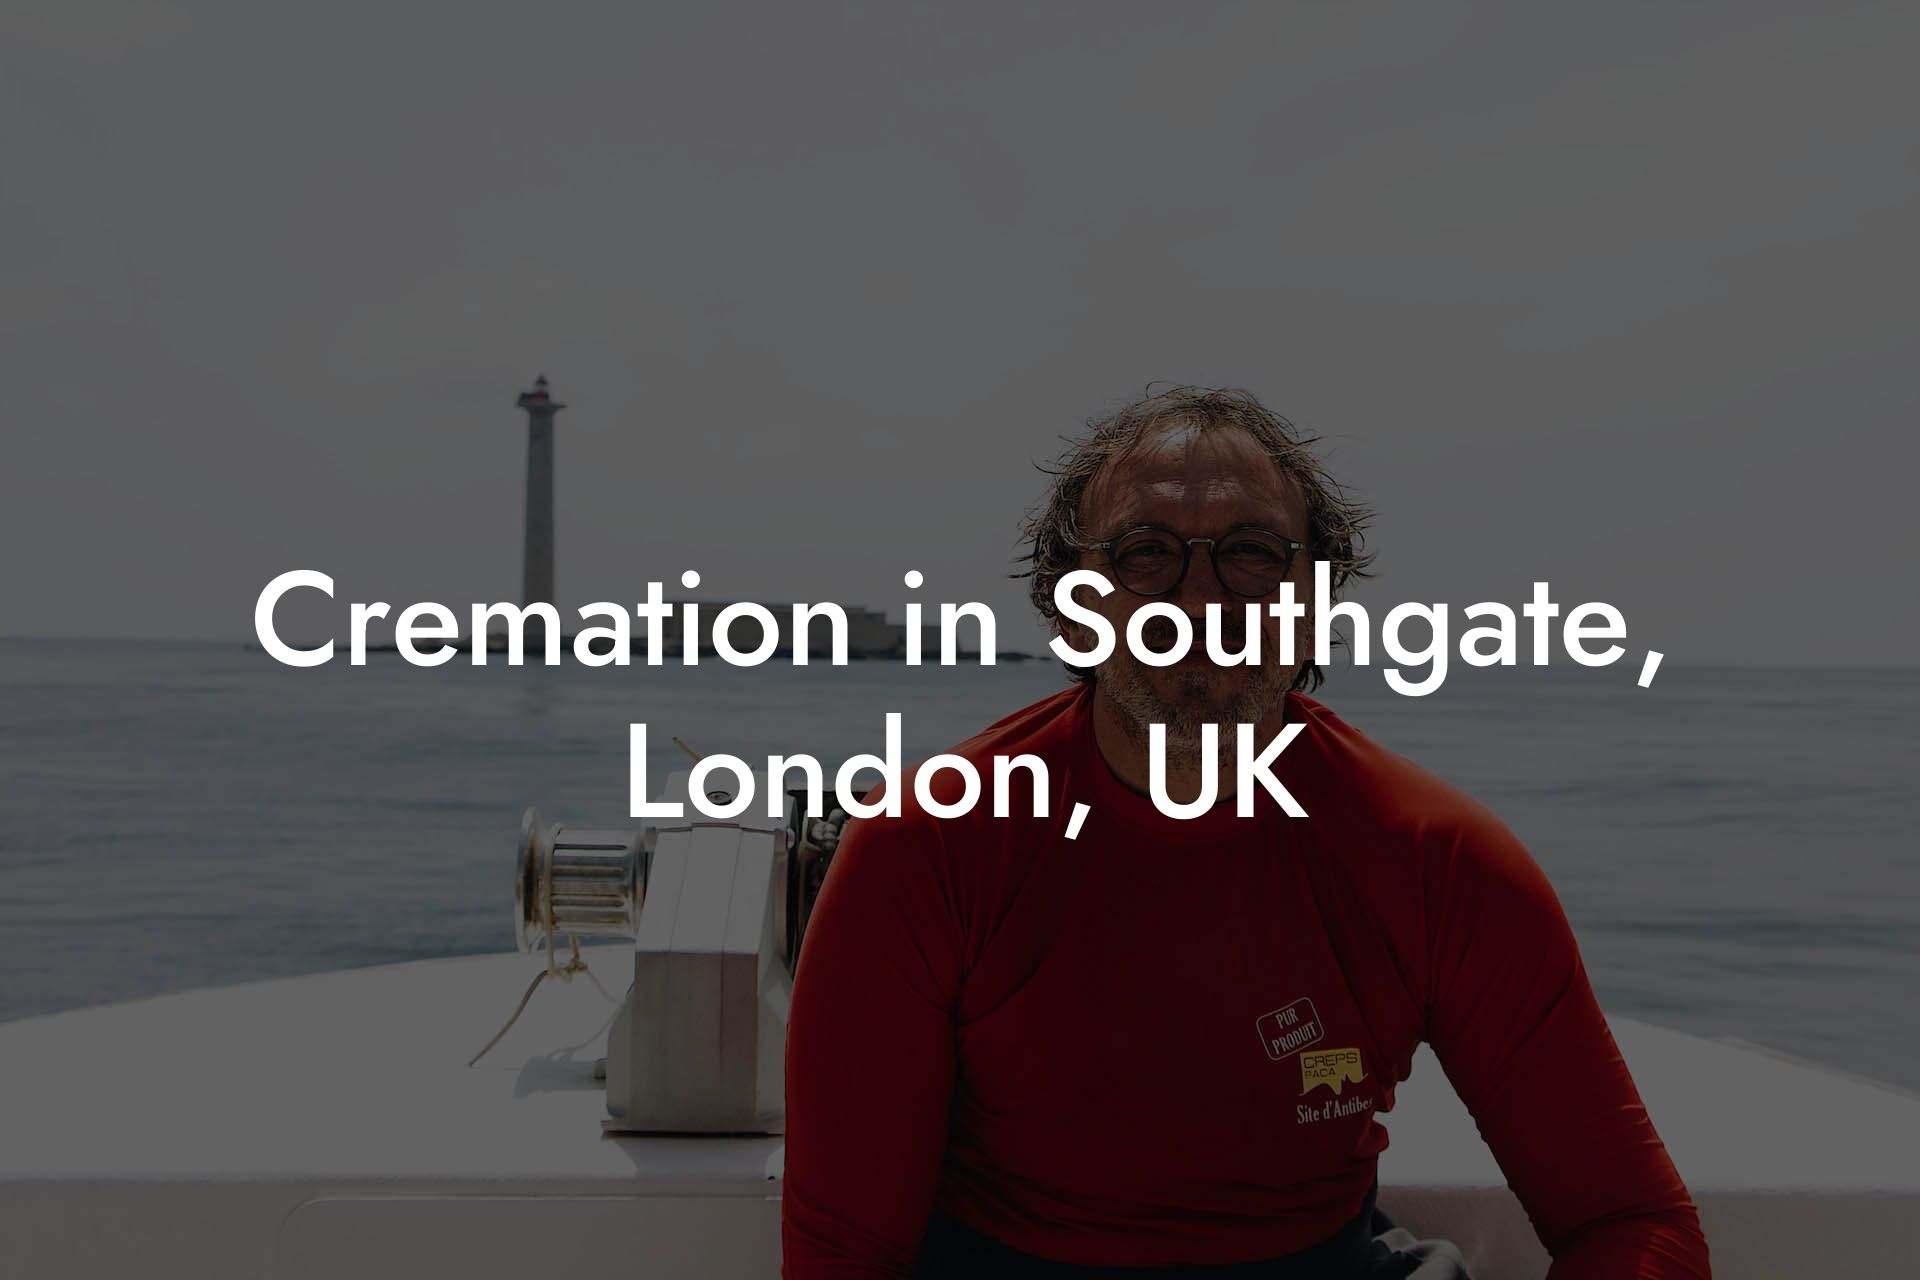 Cremation in Southgate, London, UK